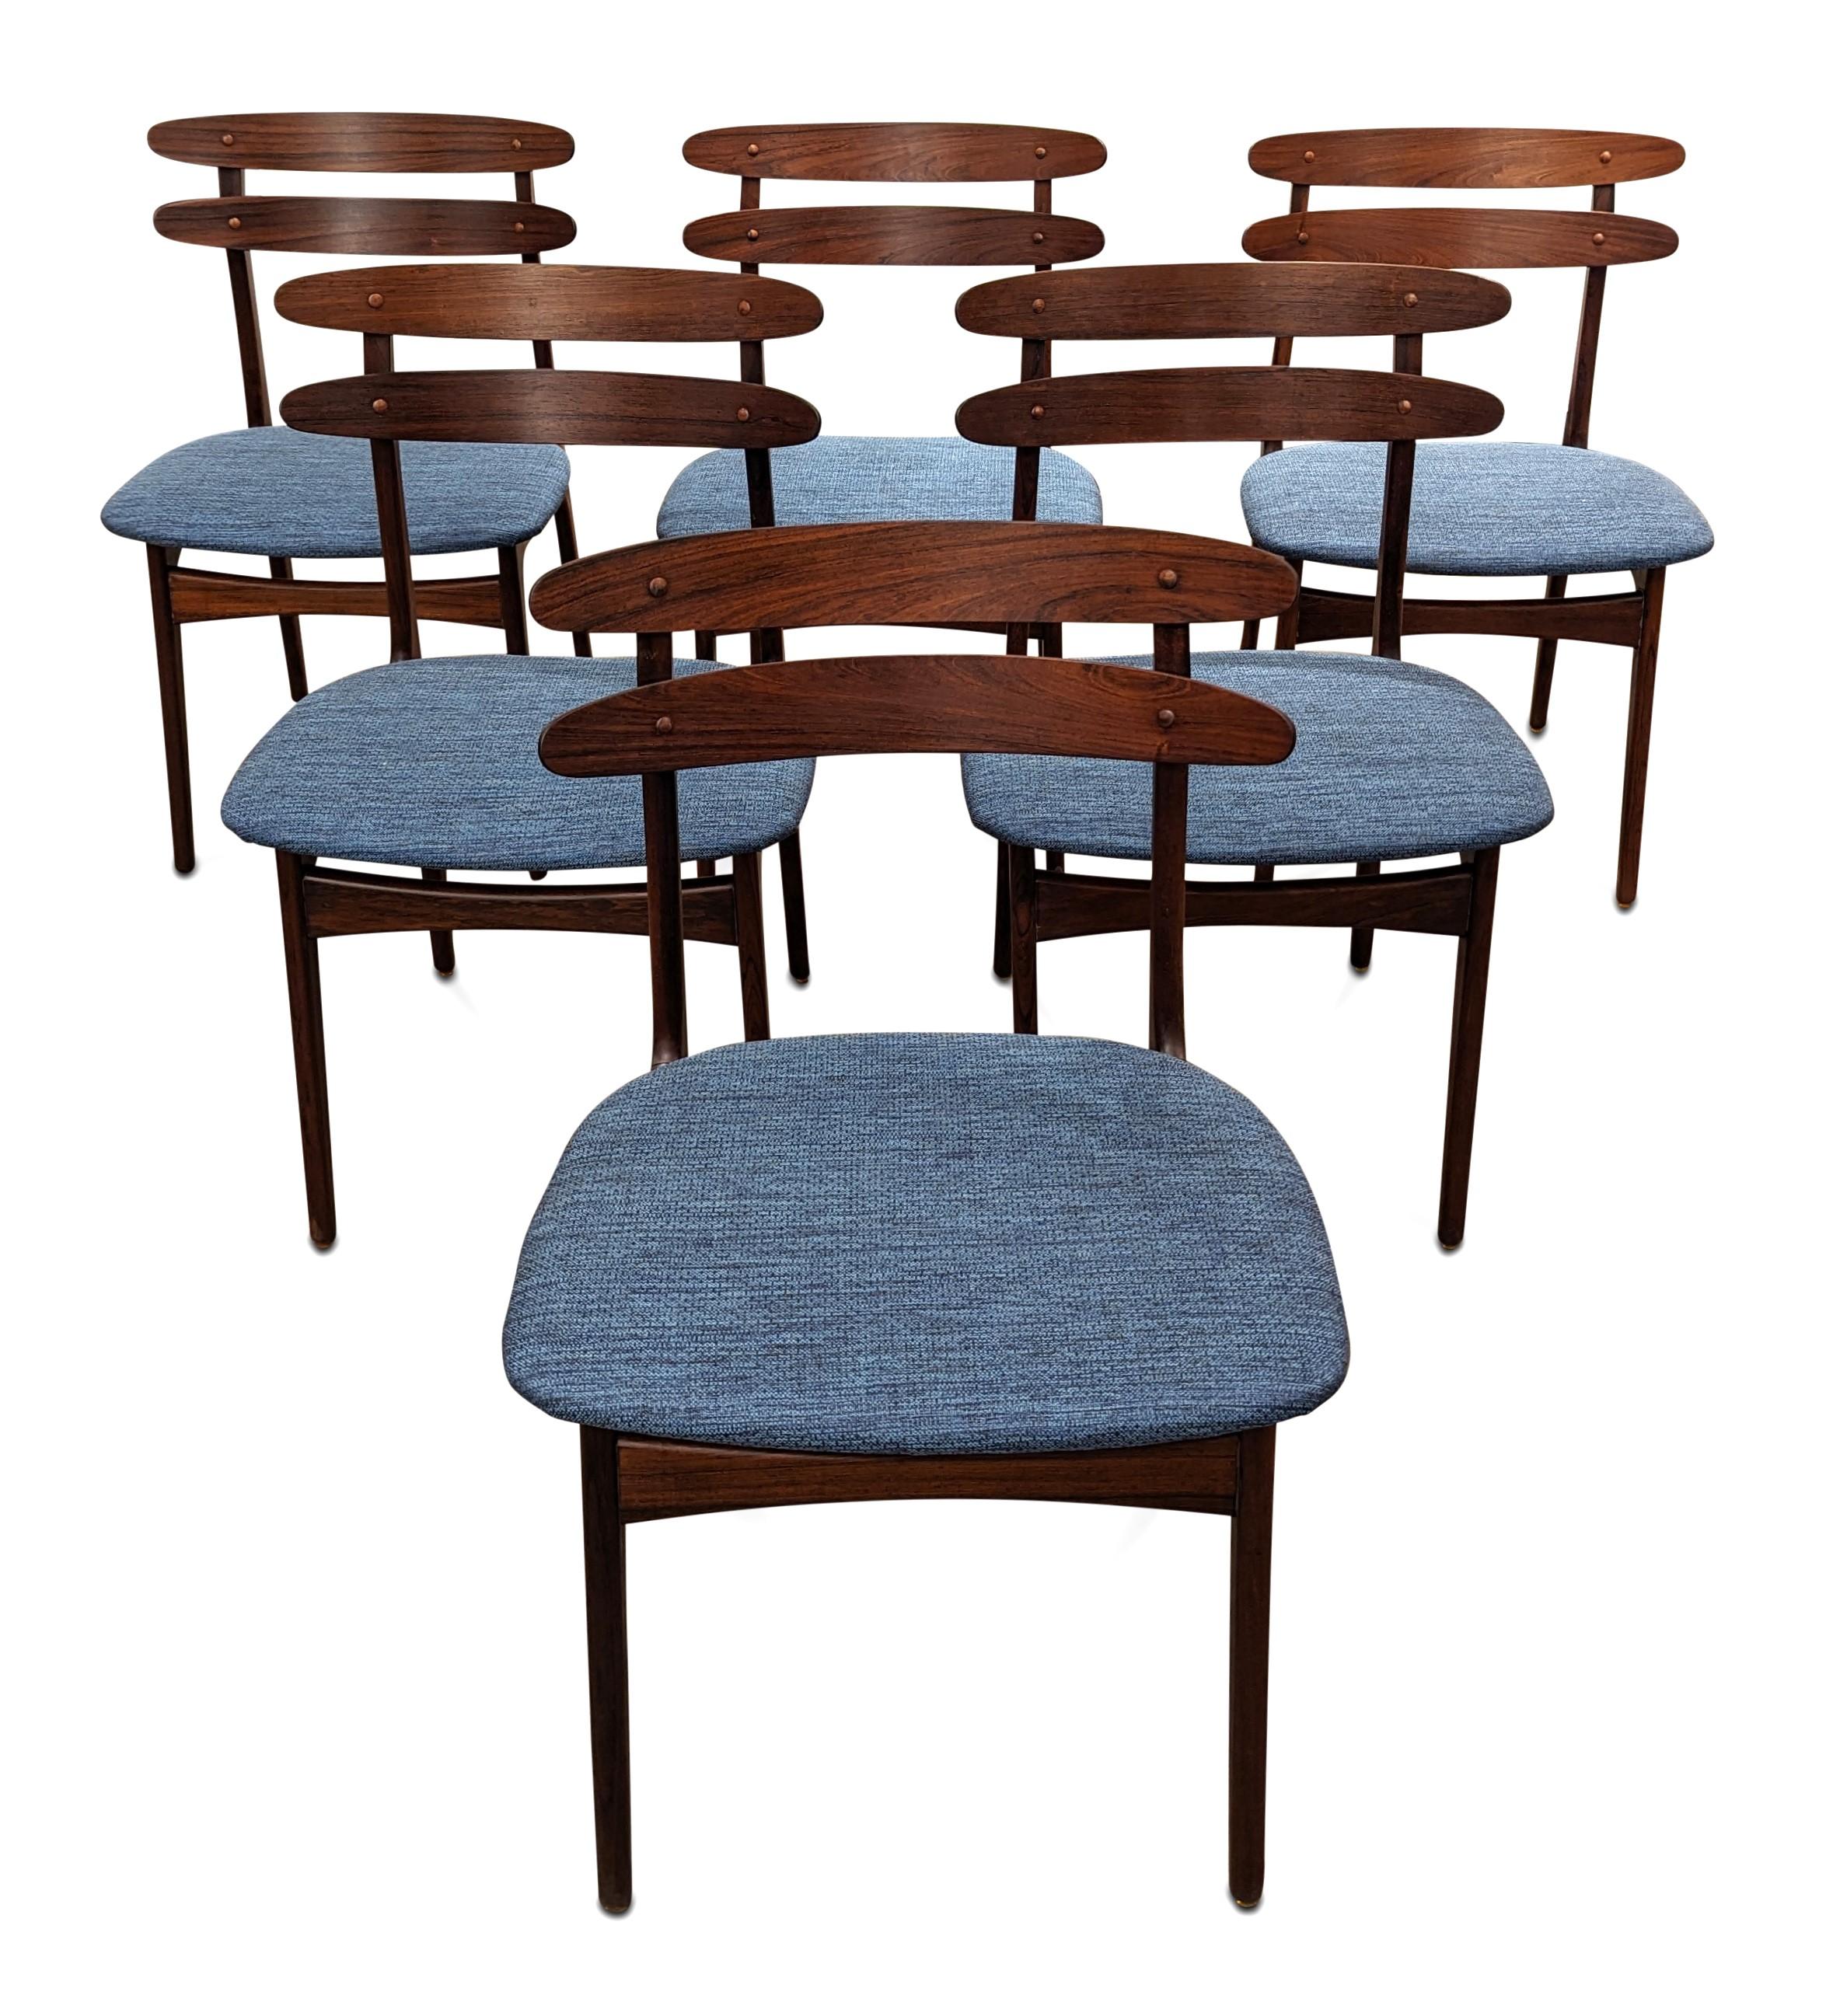 6 Rosewood Dining Chairs - 022483 Vintage Danish Mid Century 5